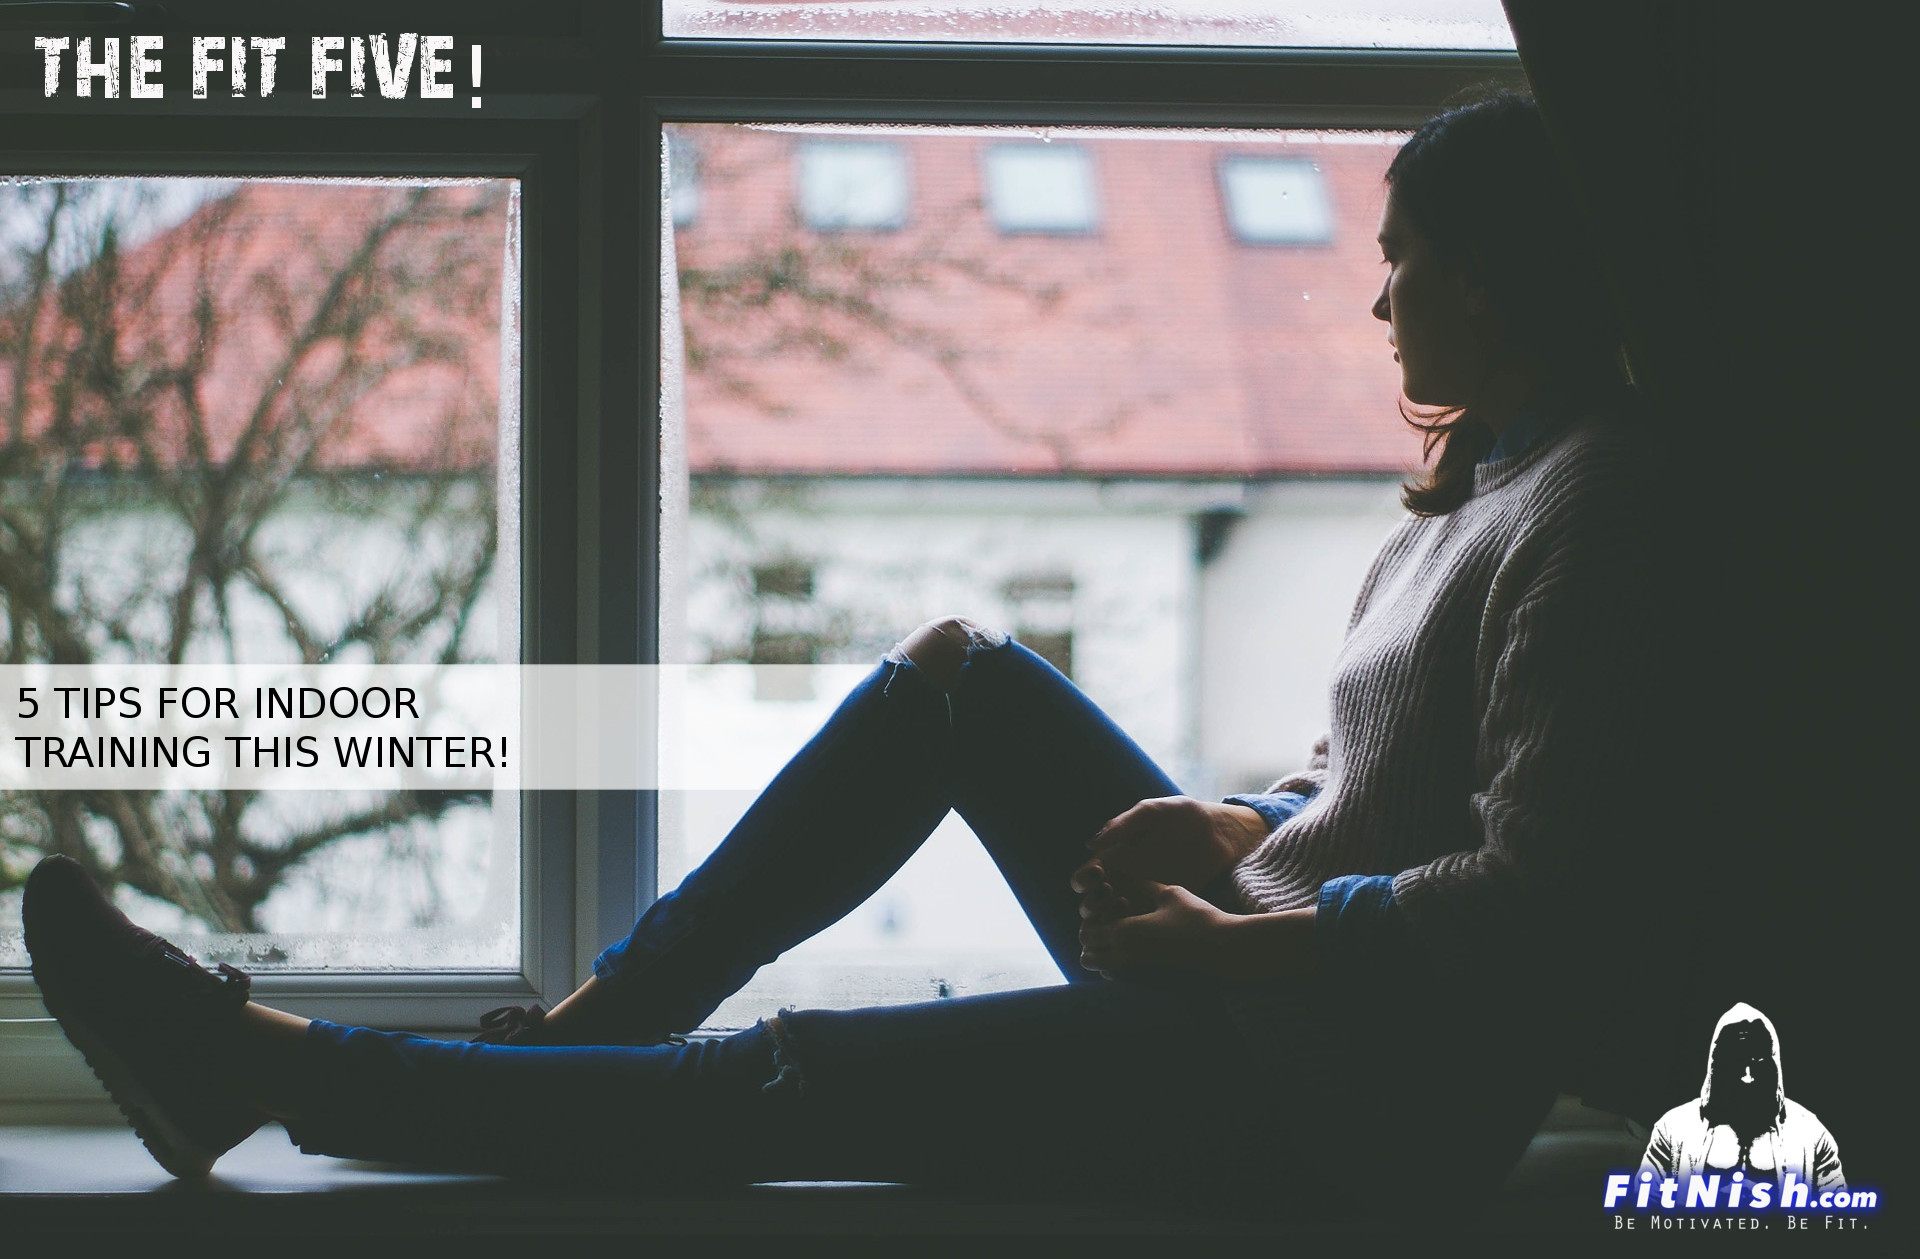 The Fit Five! 5 Tips For Indoor Training This Winter!